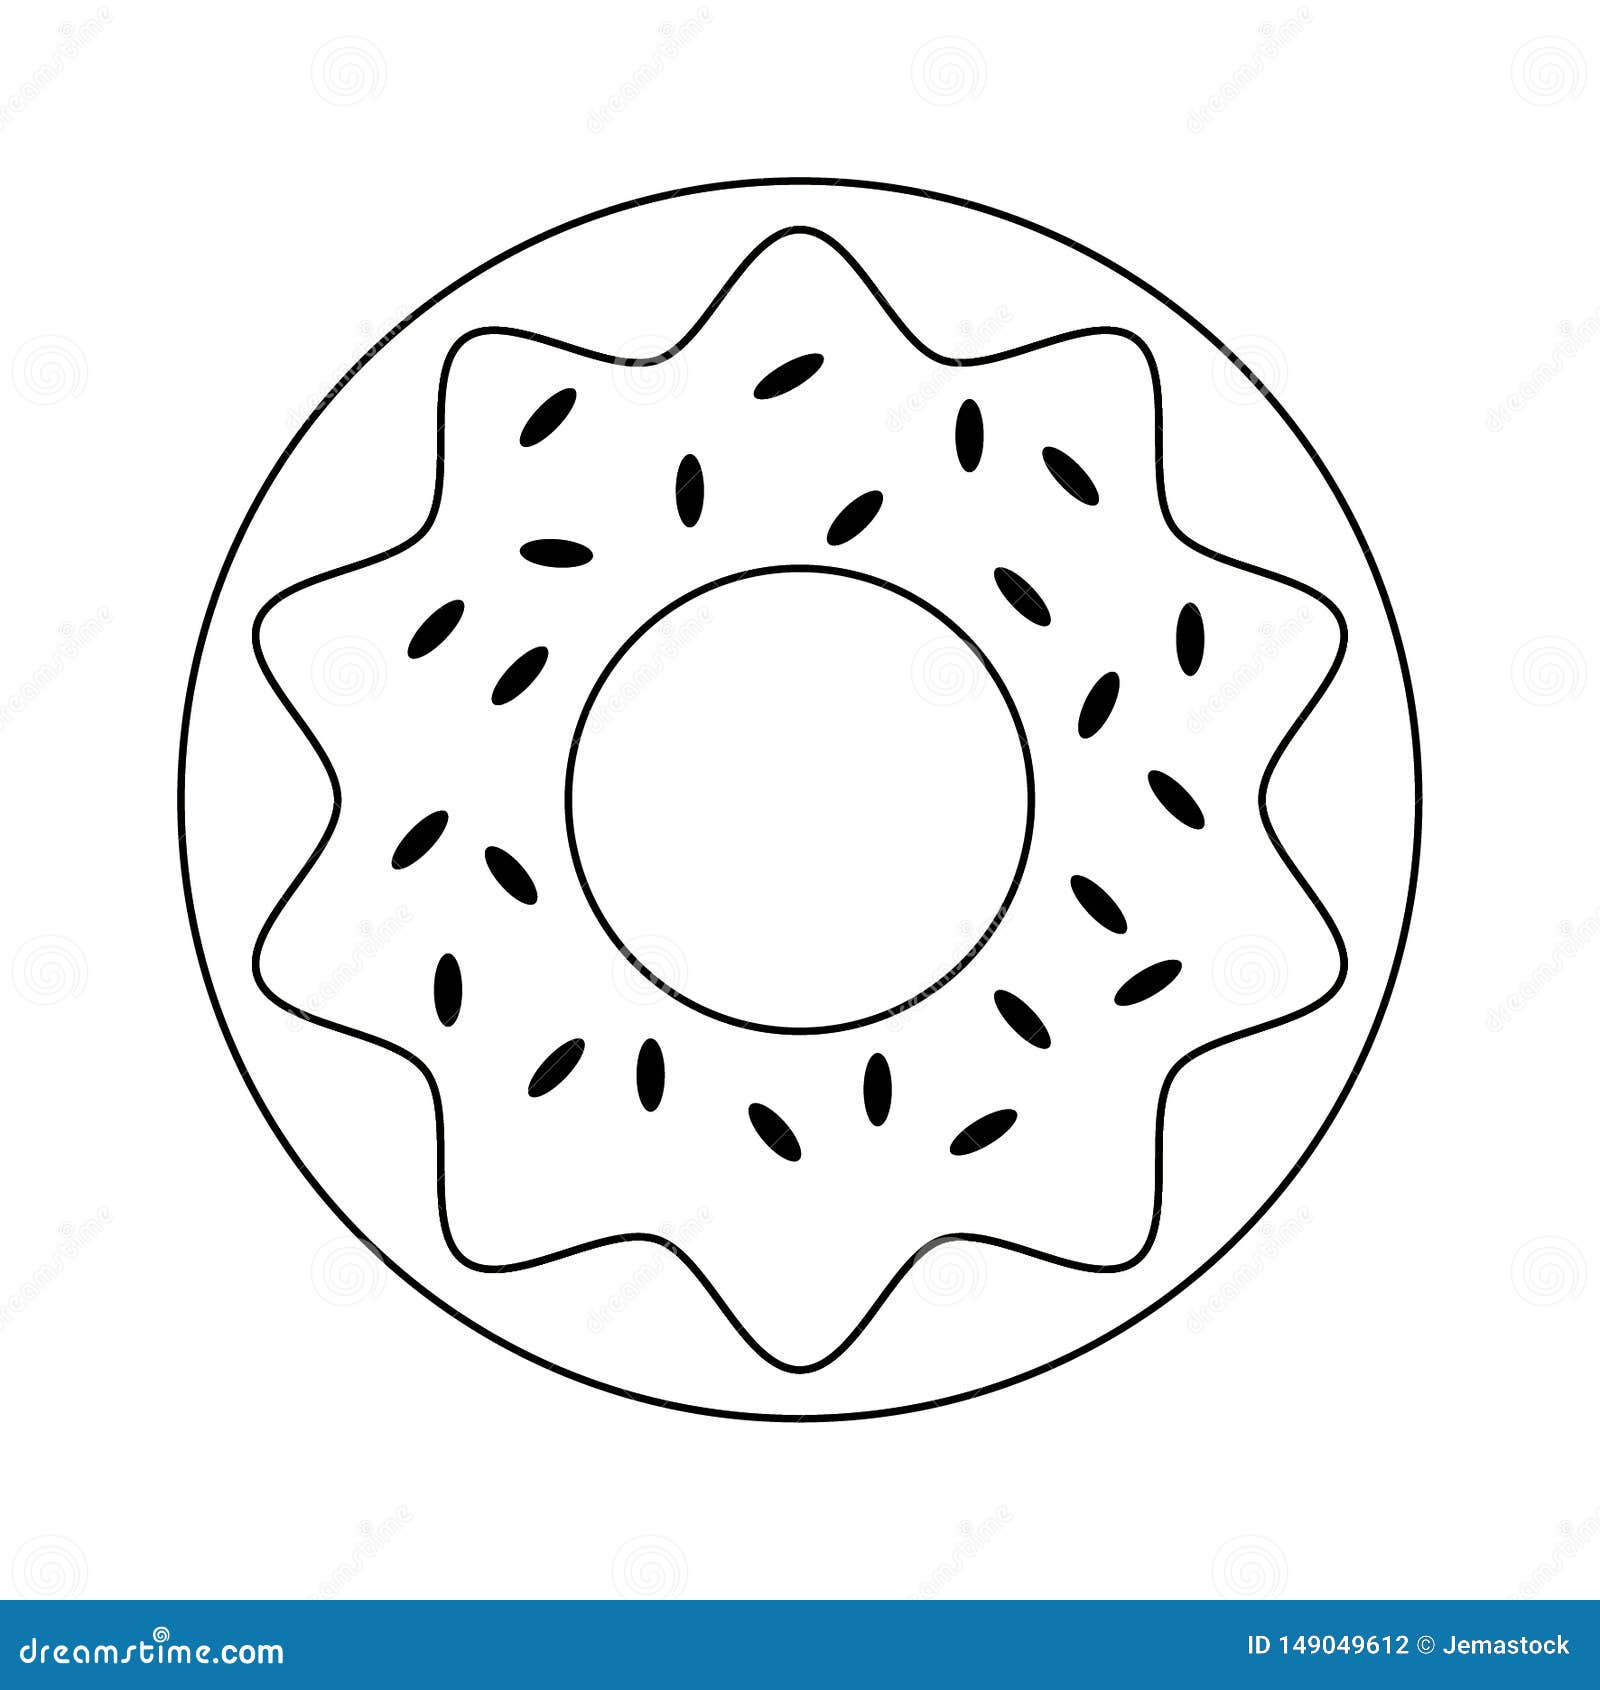 Donut Dessert Food Cartoon Isolated in Black and White Stock Vector ...